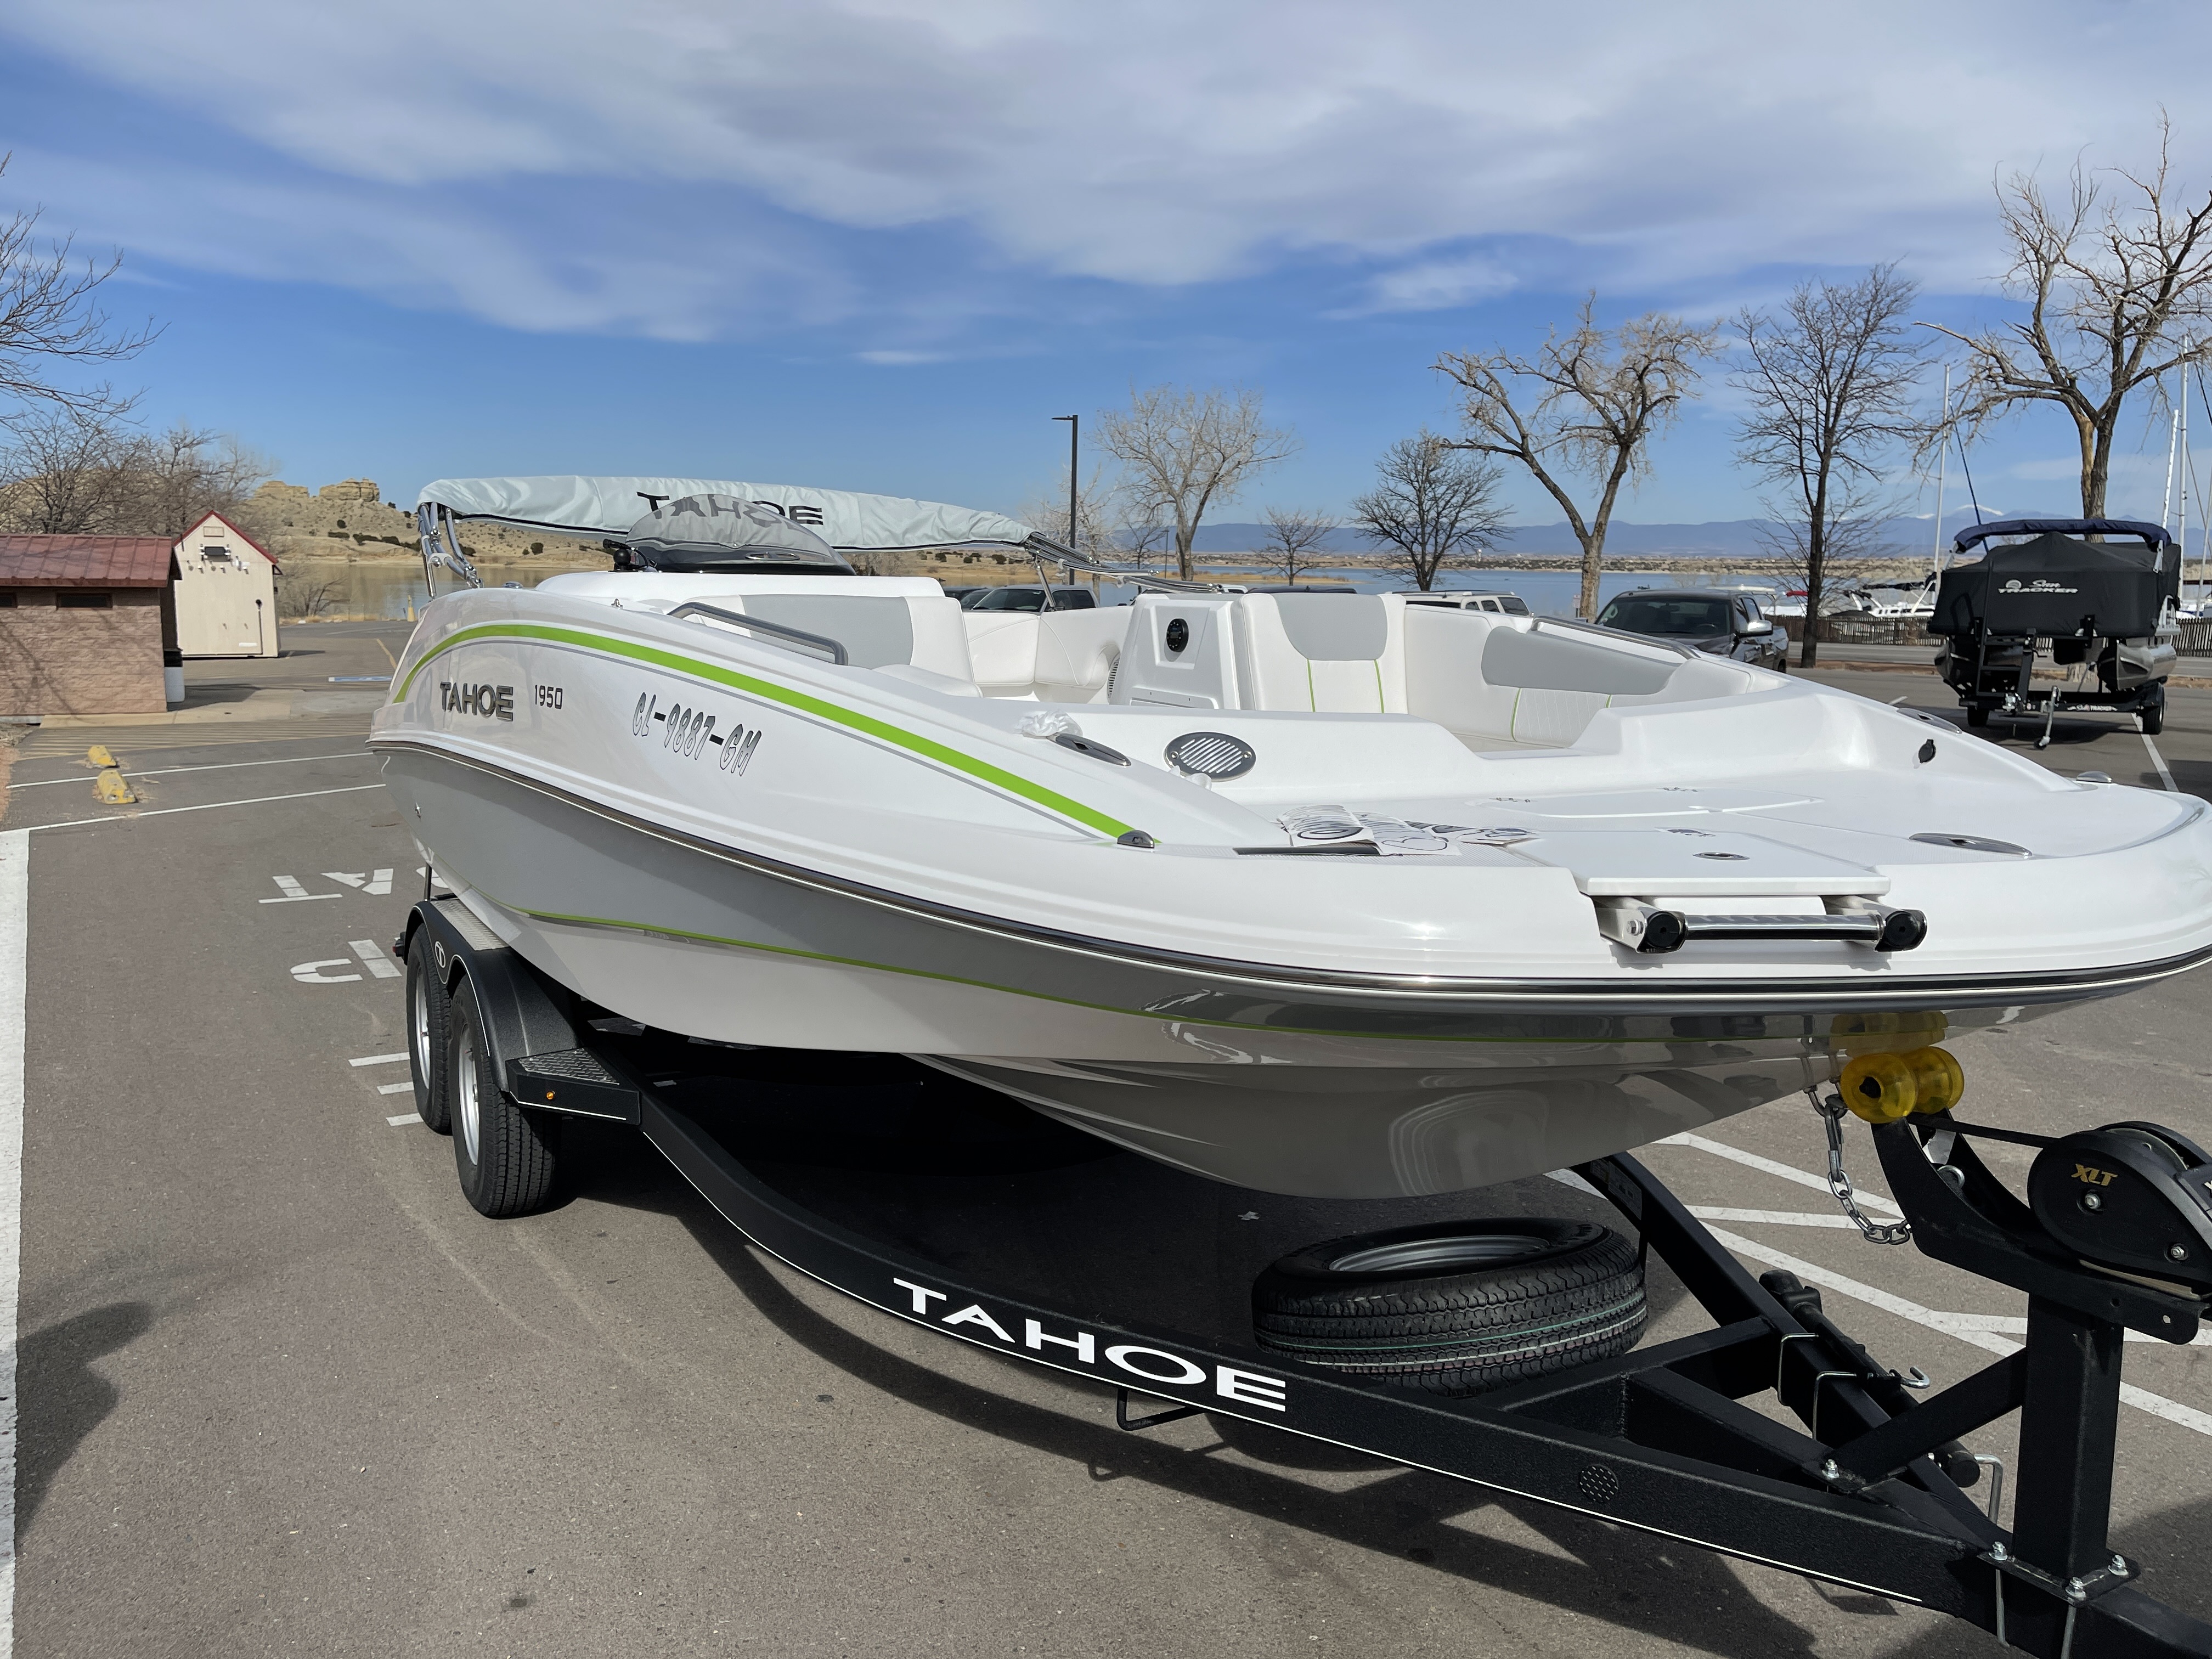 2022 Tahoe 1950 Power boat for sale in Colo Spgs, CO - image 3 